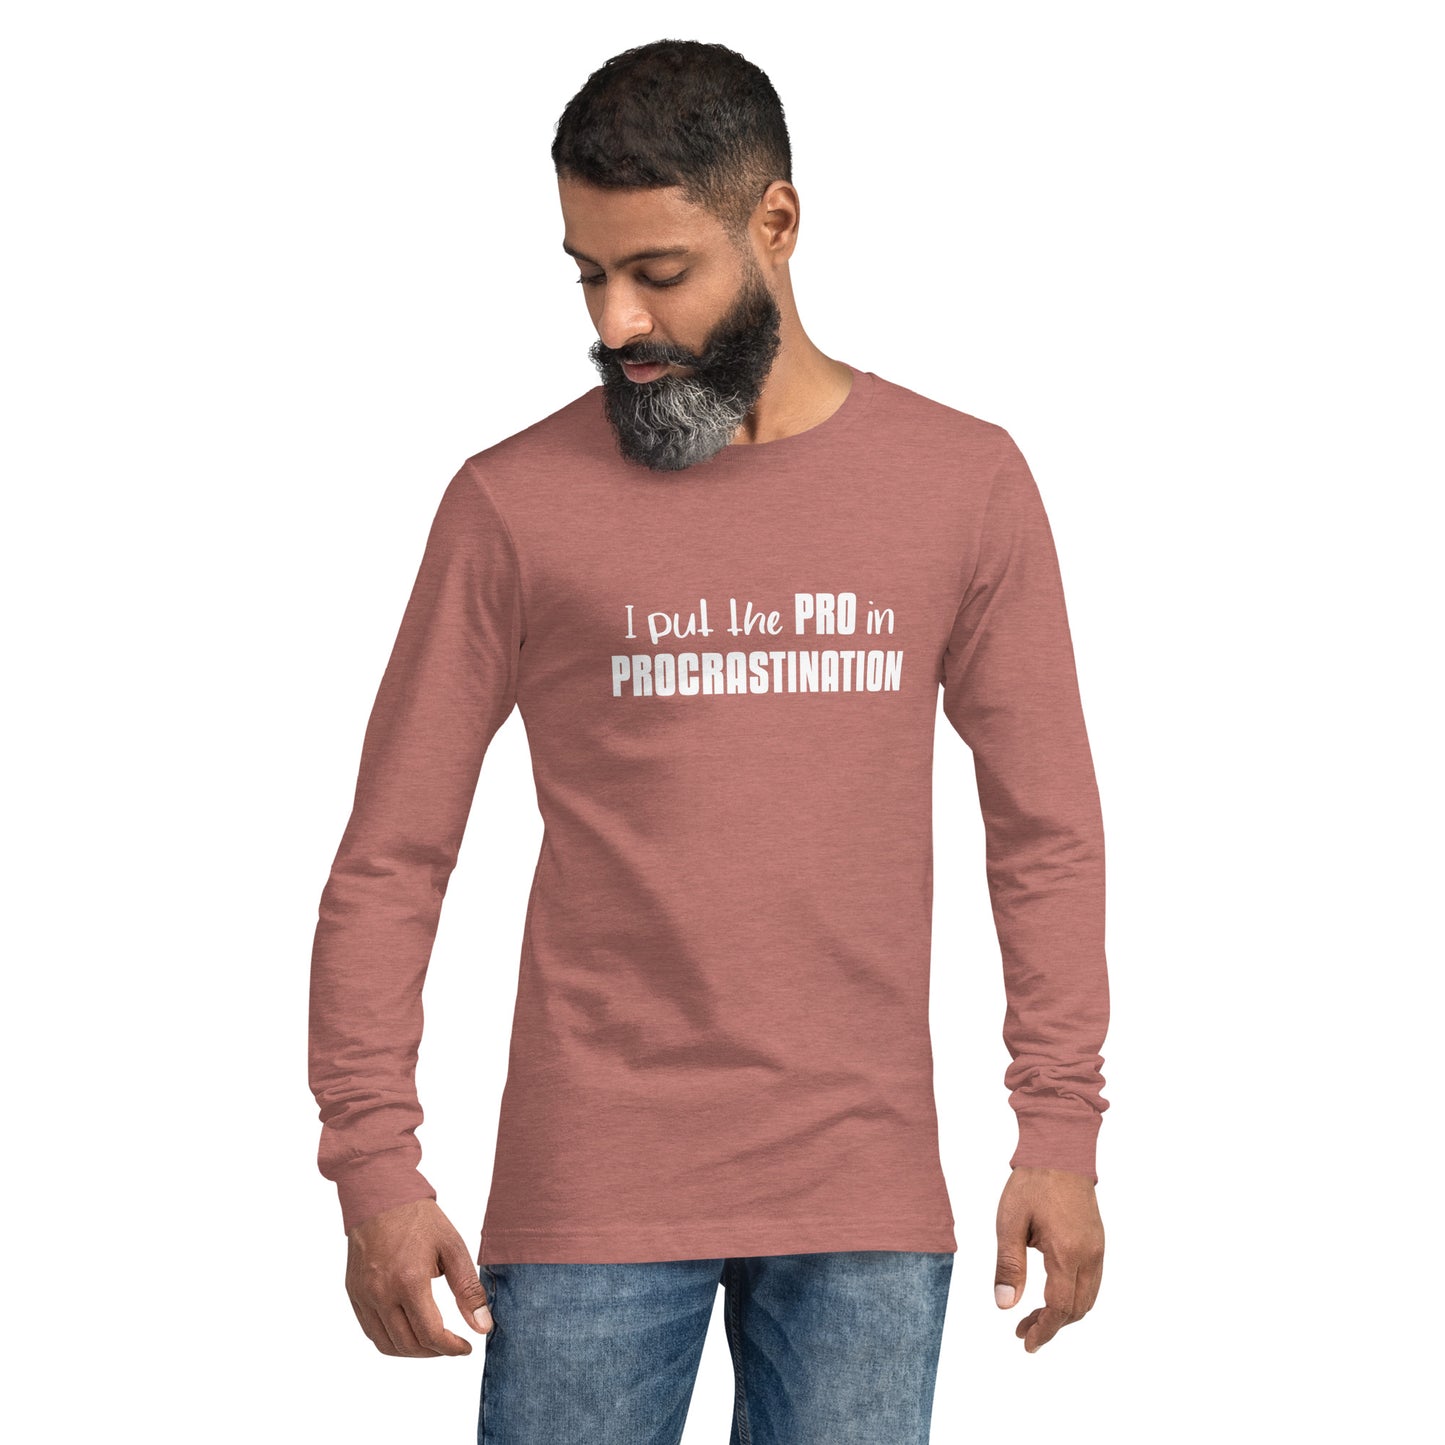 Male model wearing Heather Mauve long-sleeve shirt with text graphic: "I put the PRO in PROCRASTINATION"